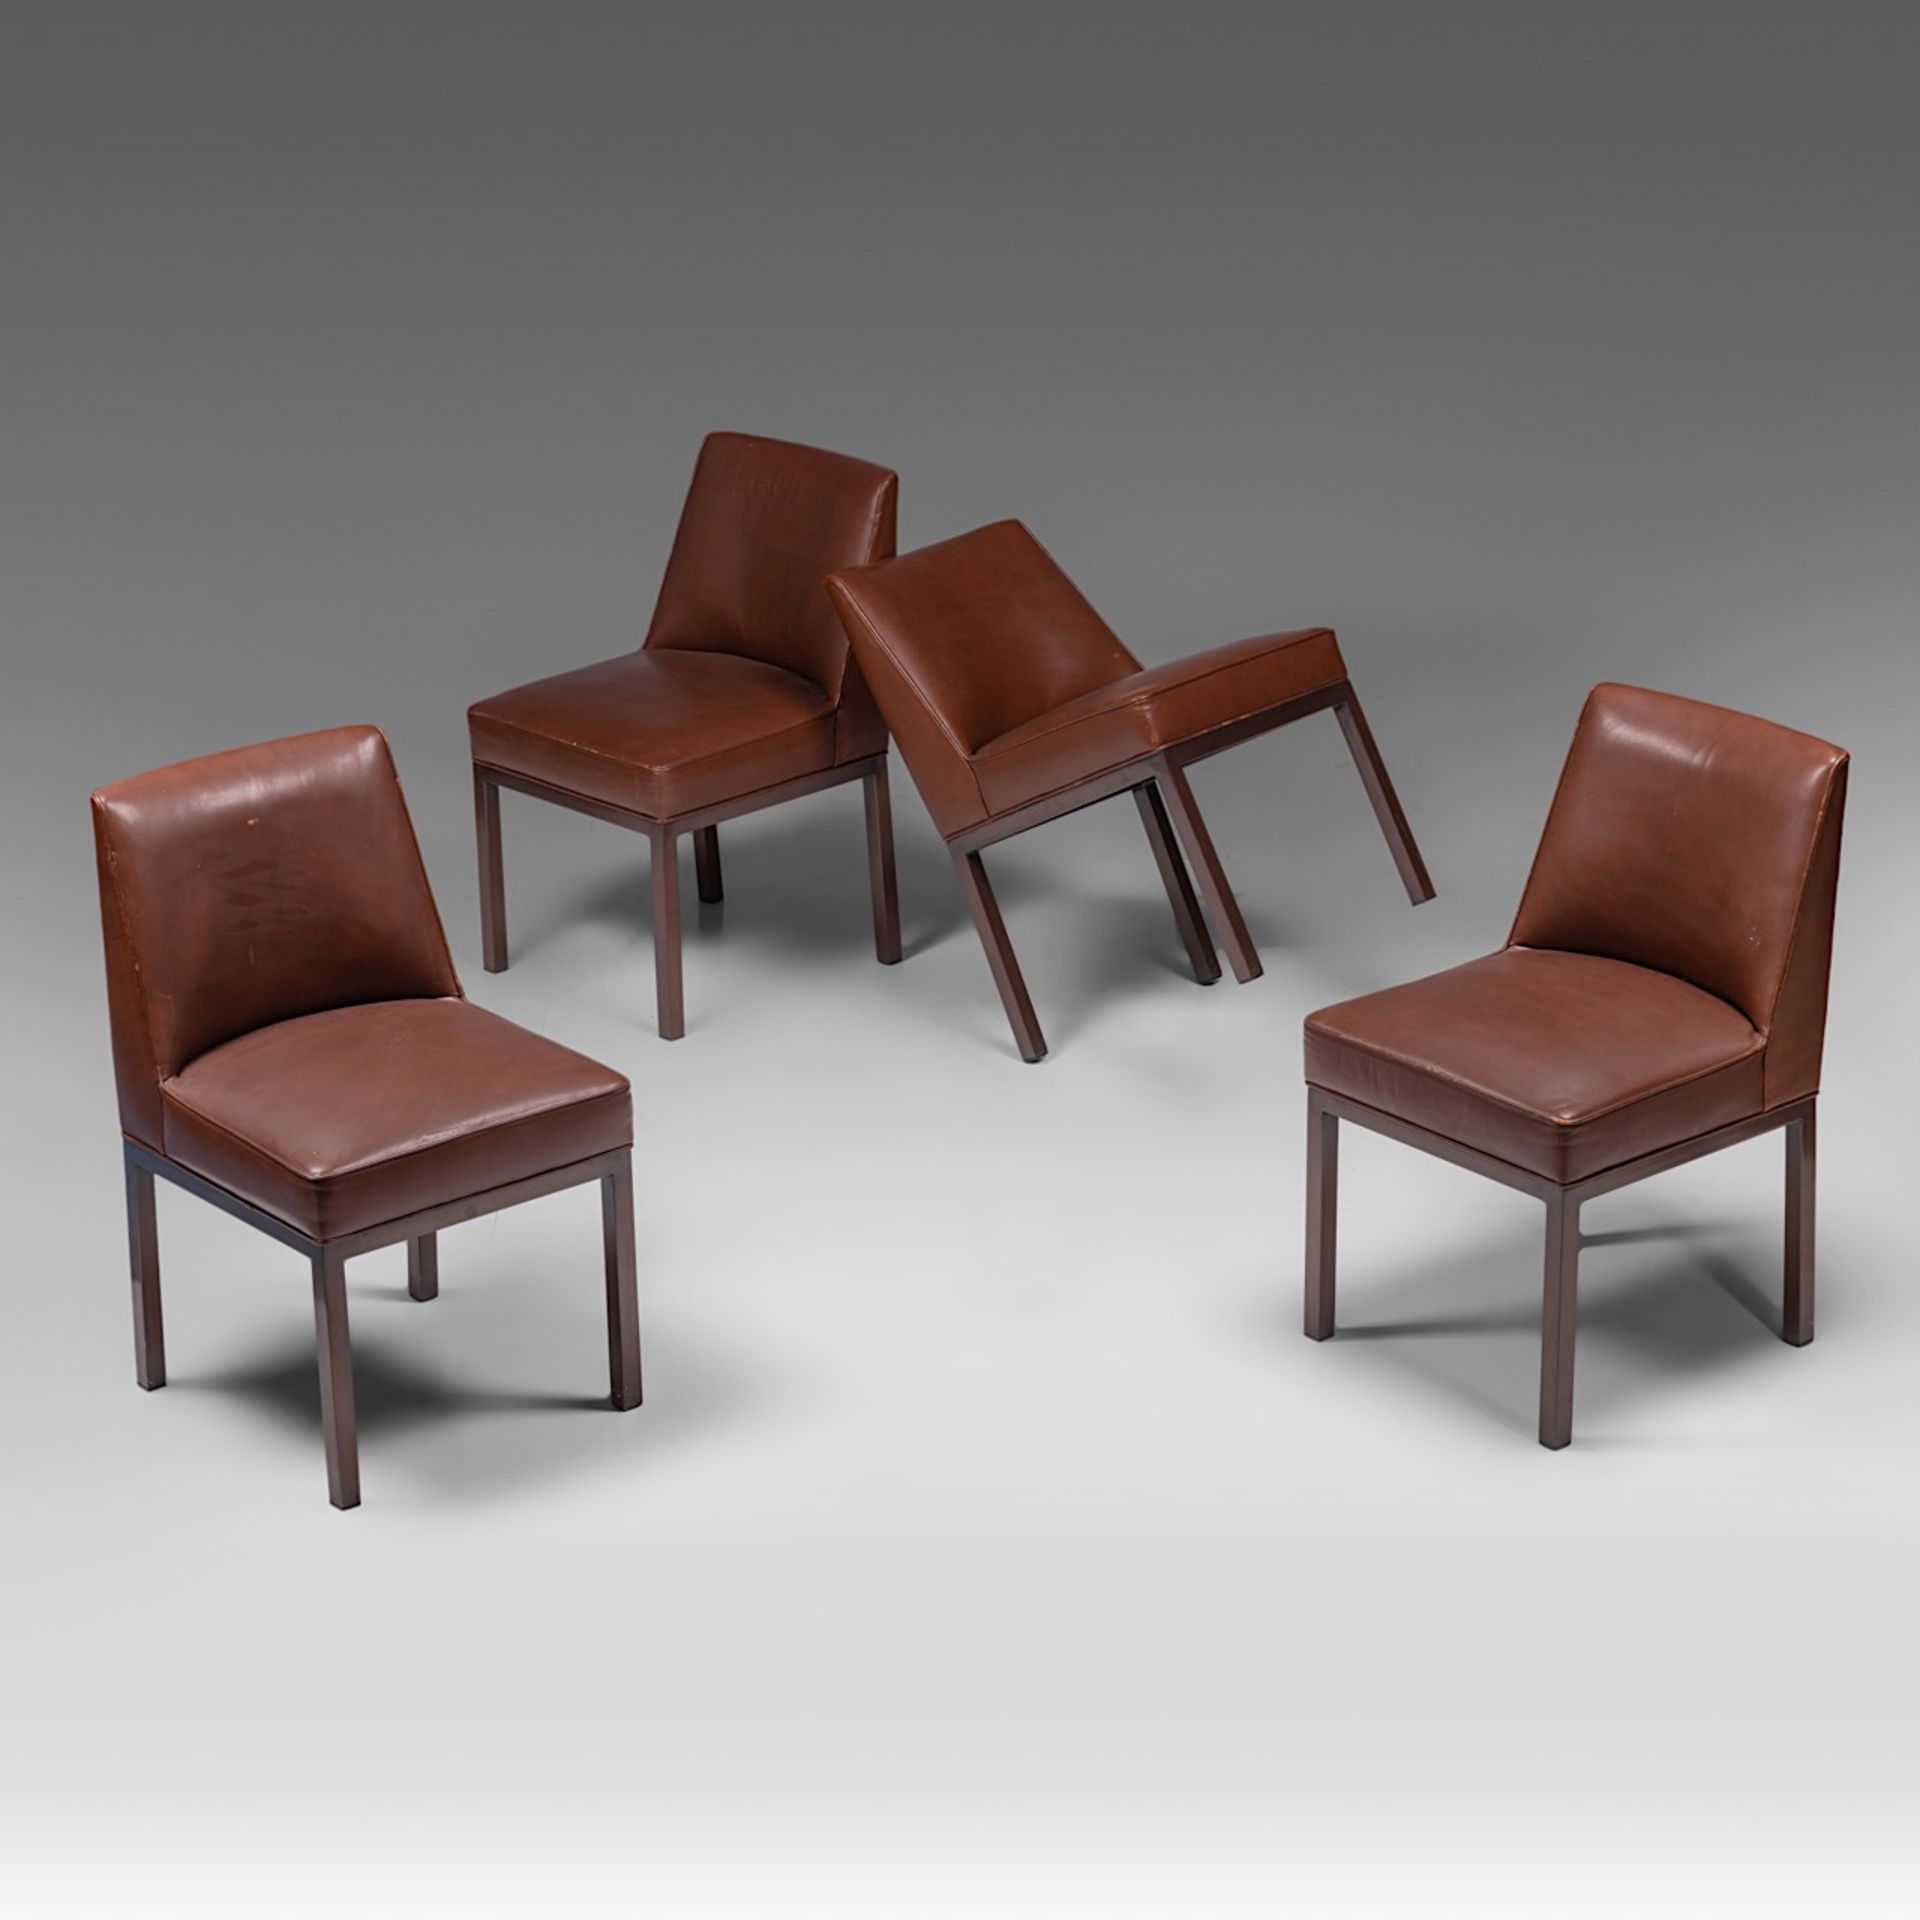 A set of four Jules Wabbes (1919-1974) chairs in brown leather and lacquered metal, H 79 cm - Image 3 of 9